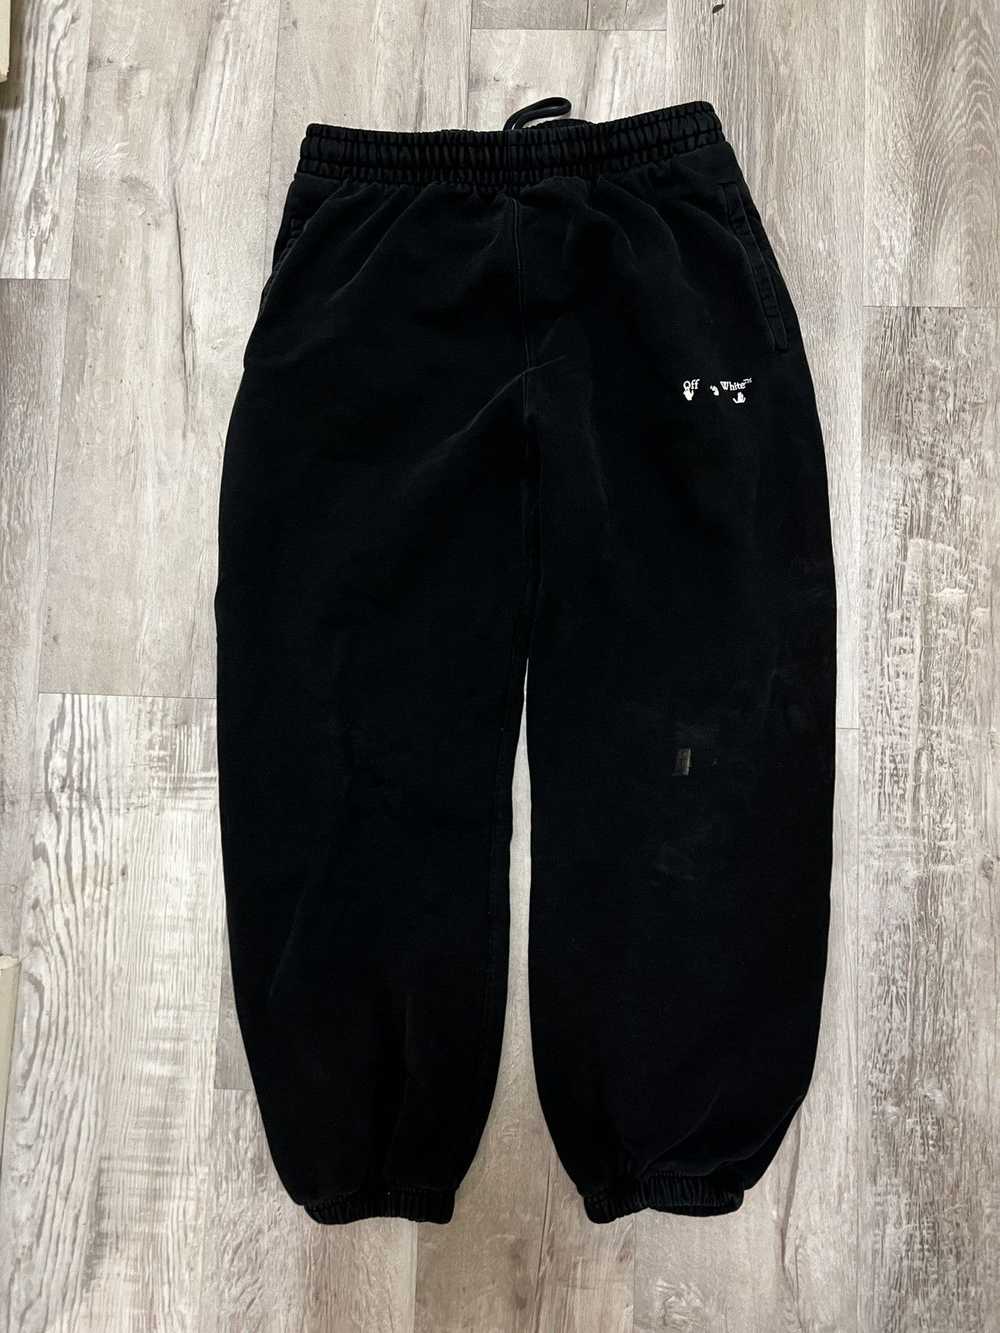 Off-White Off white womens sweatpants XL - image 1